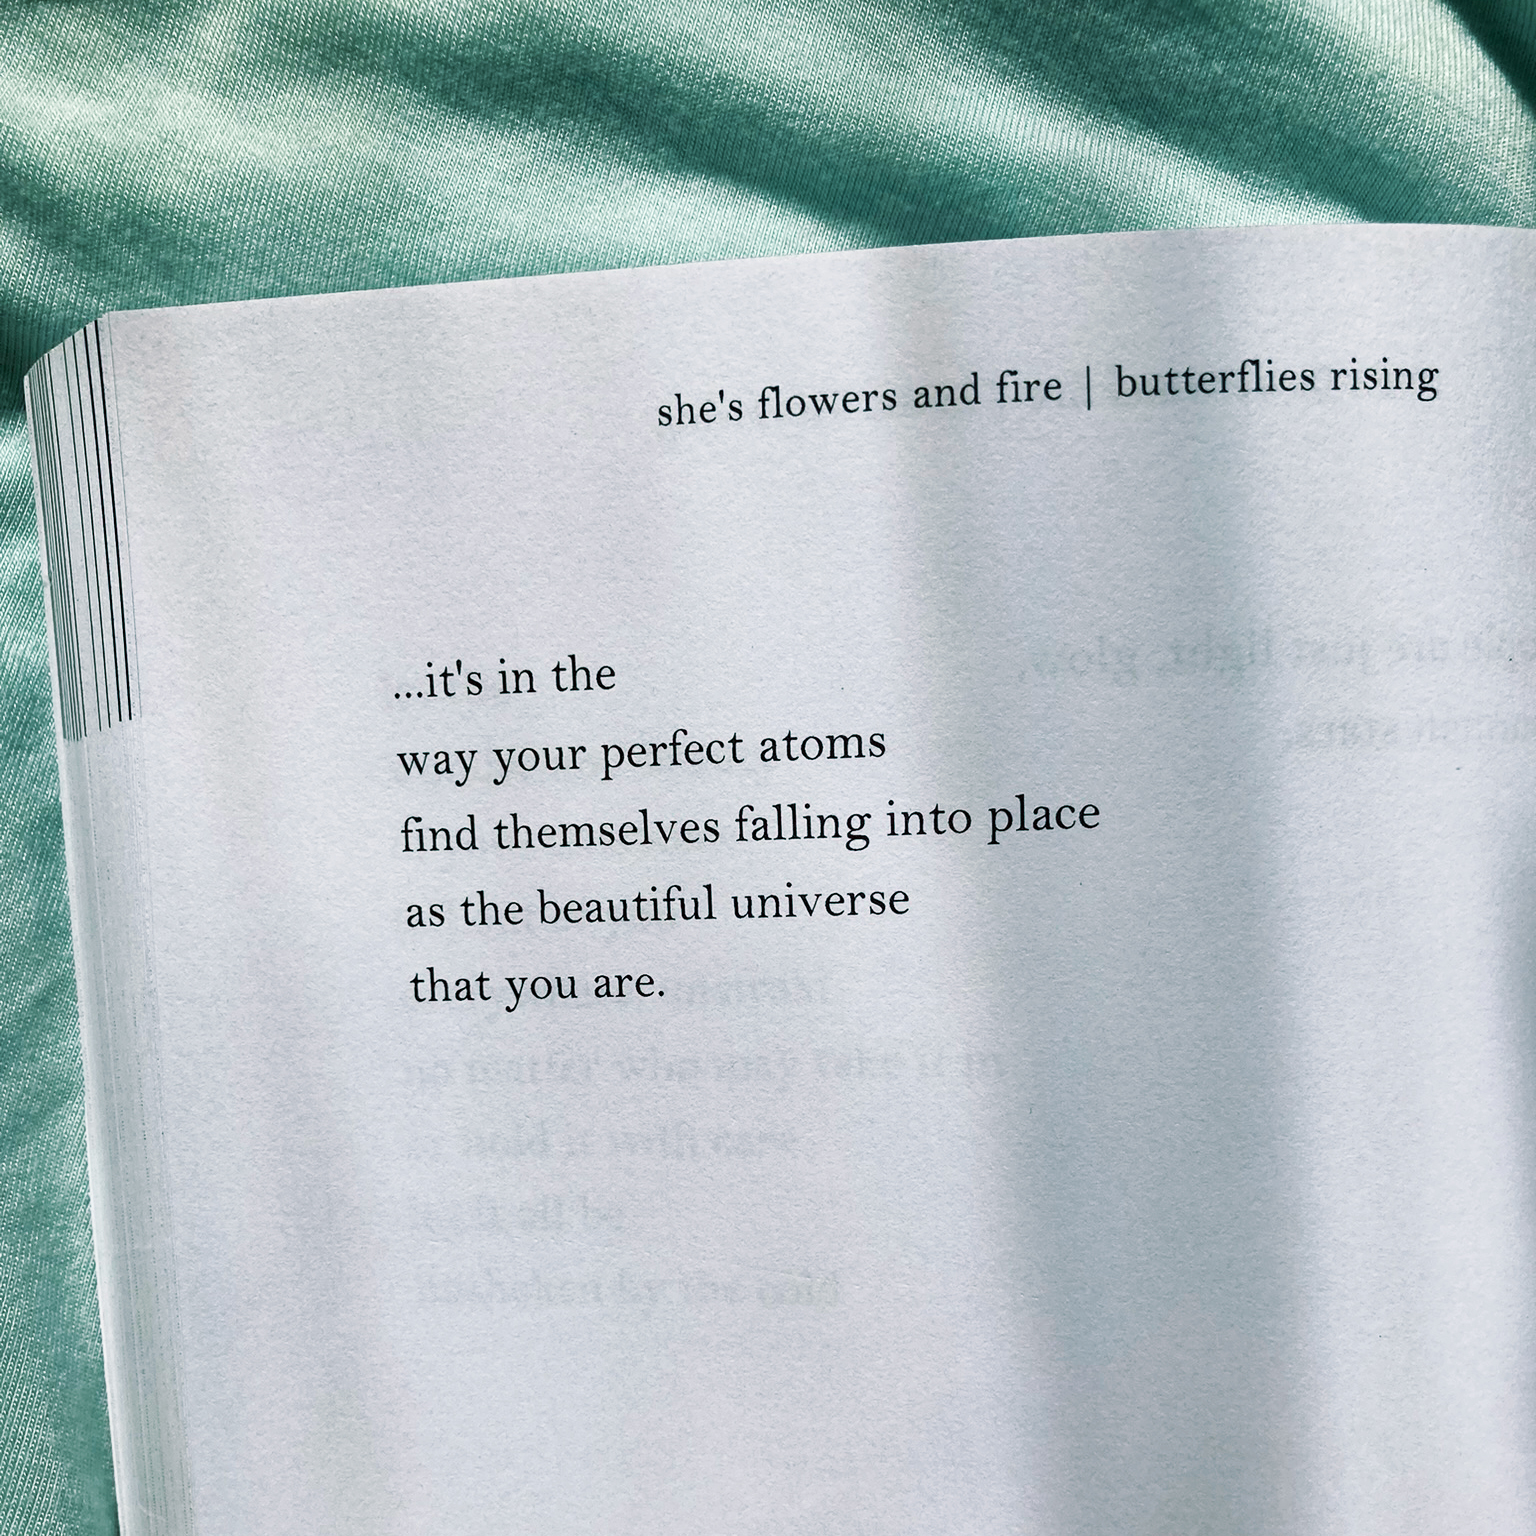 it's in the way your perfect atoms find themselves falling into place as the beautiful universe that you are